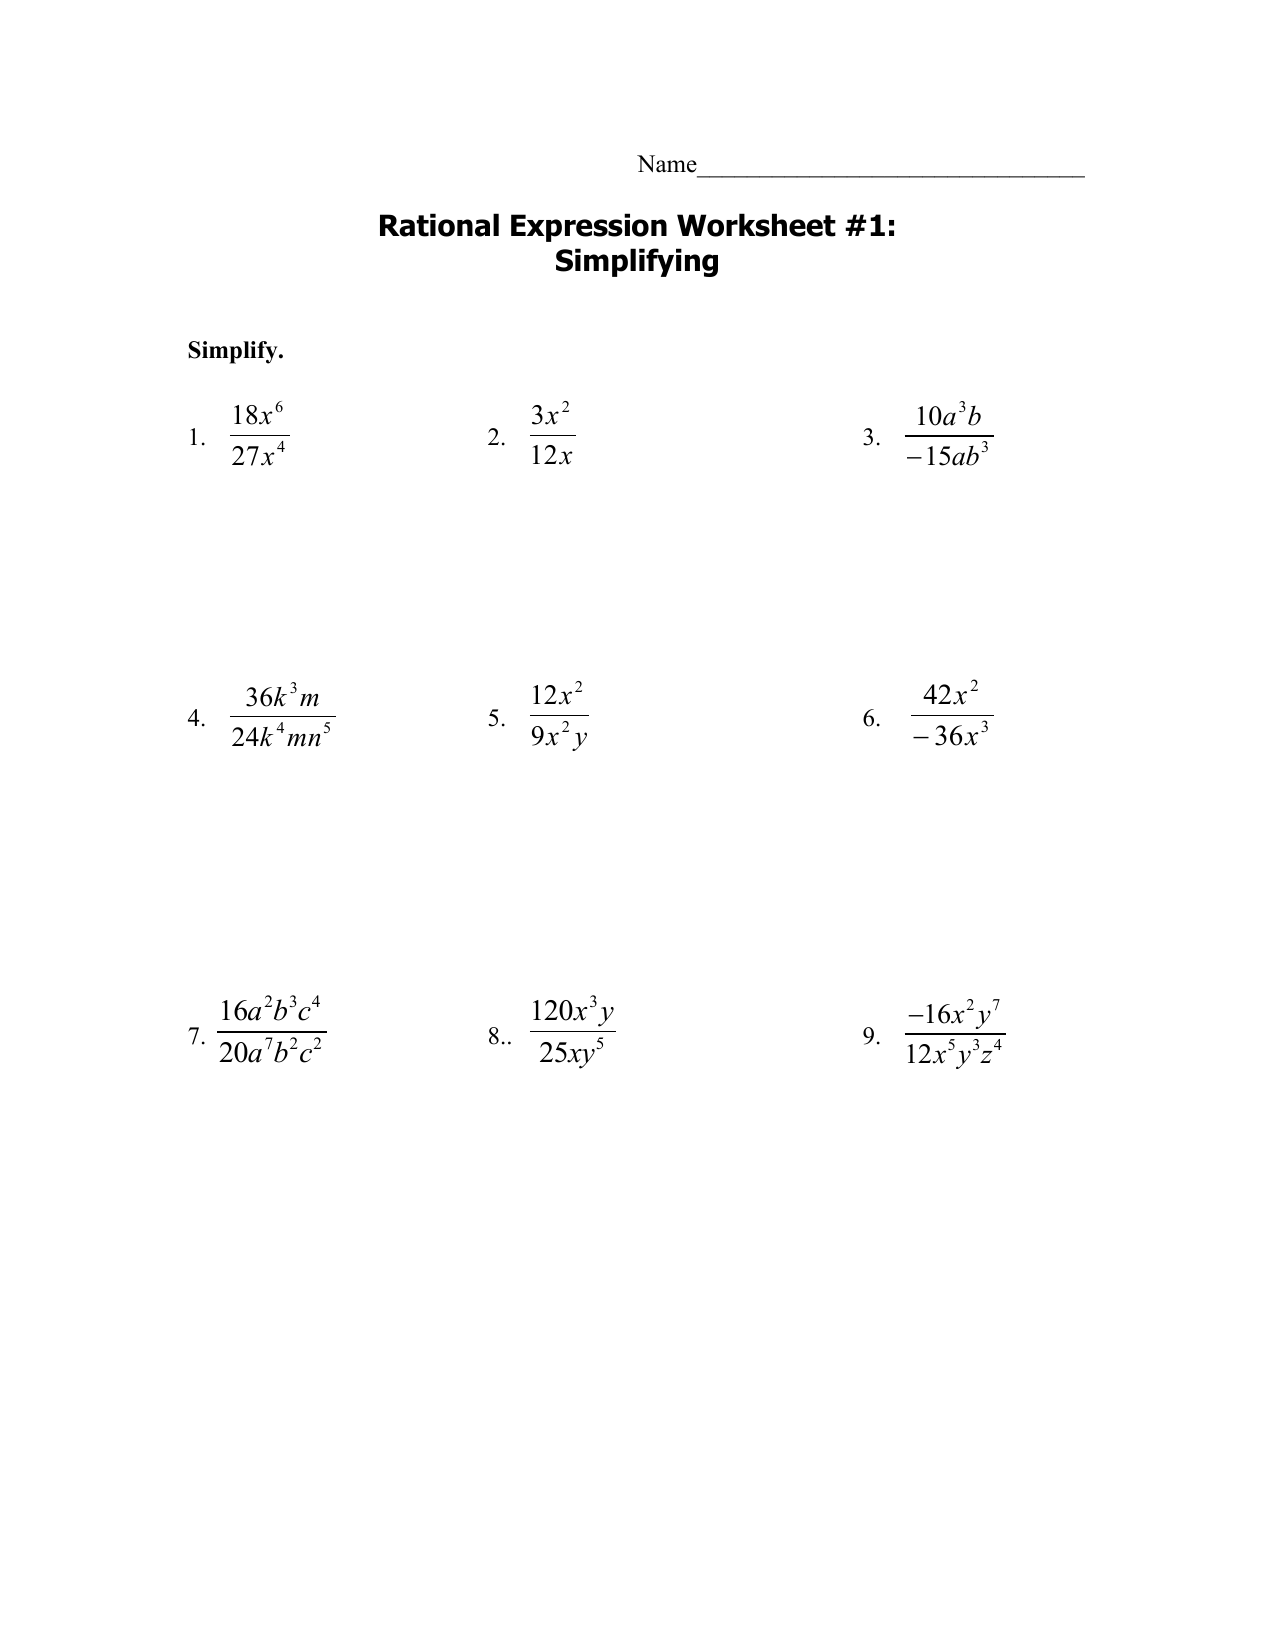 M11111111 rationalworksheets1111-111111 1111 For Simplifying Rational Expressions Worksheet Answers